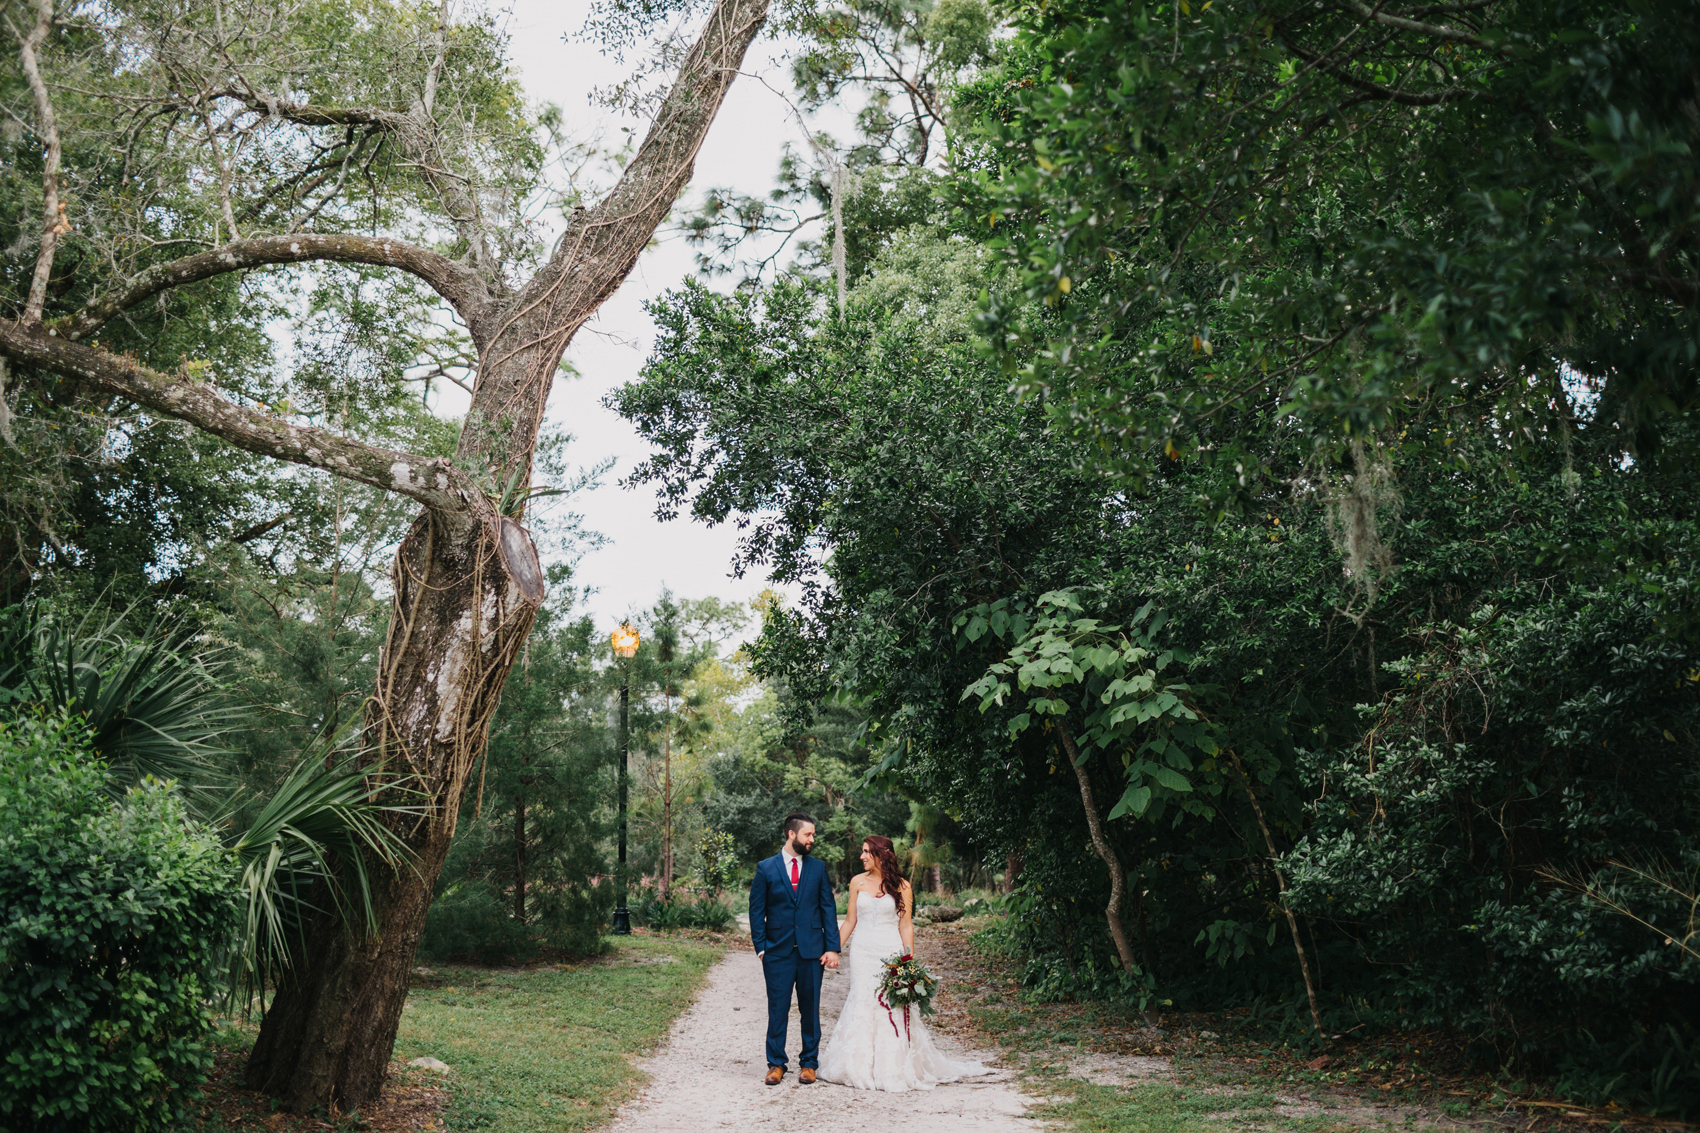 Woodsy natural wedding photos of the bride and groom at Mead Garden in Orlando